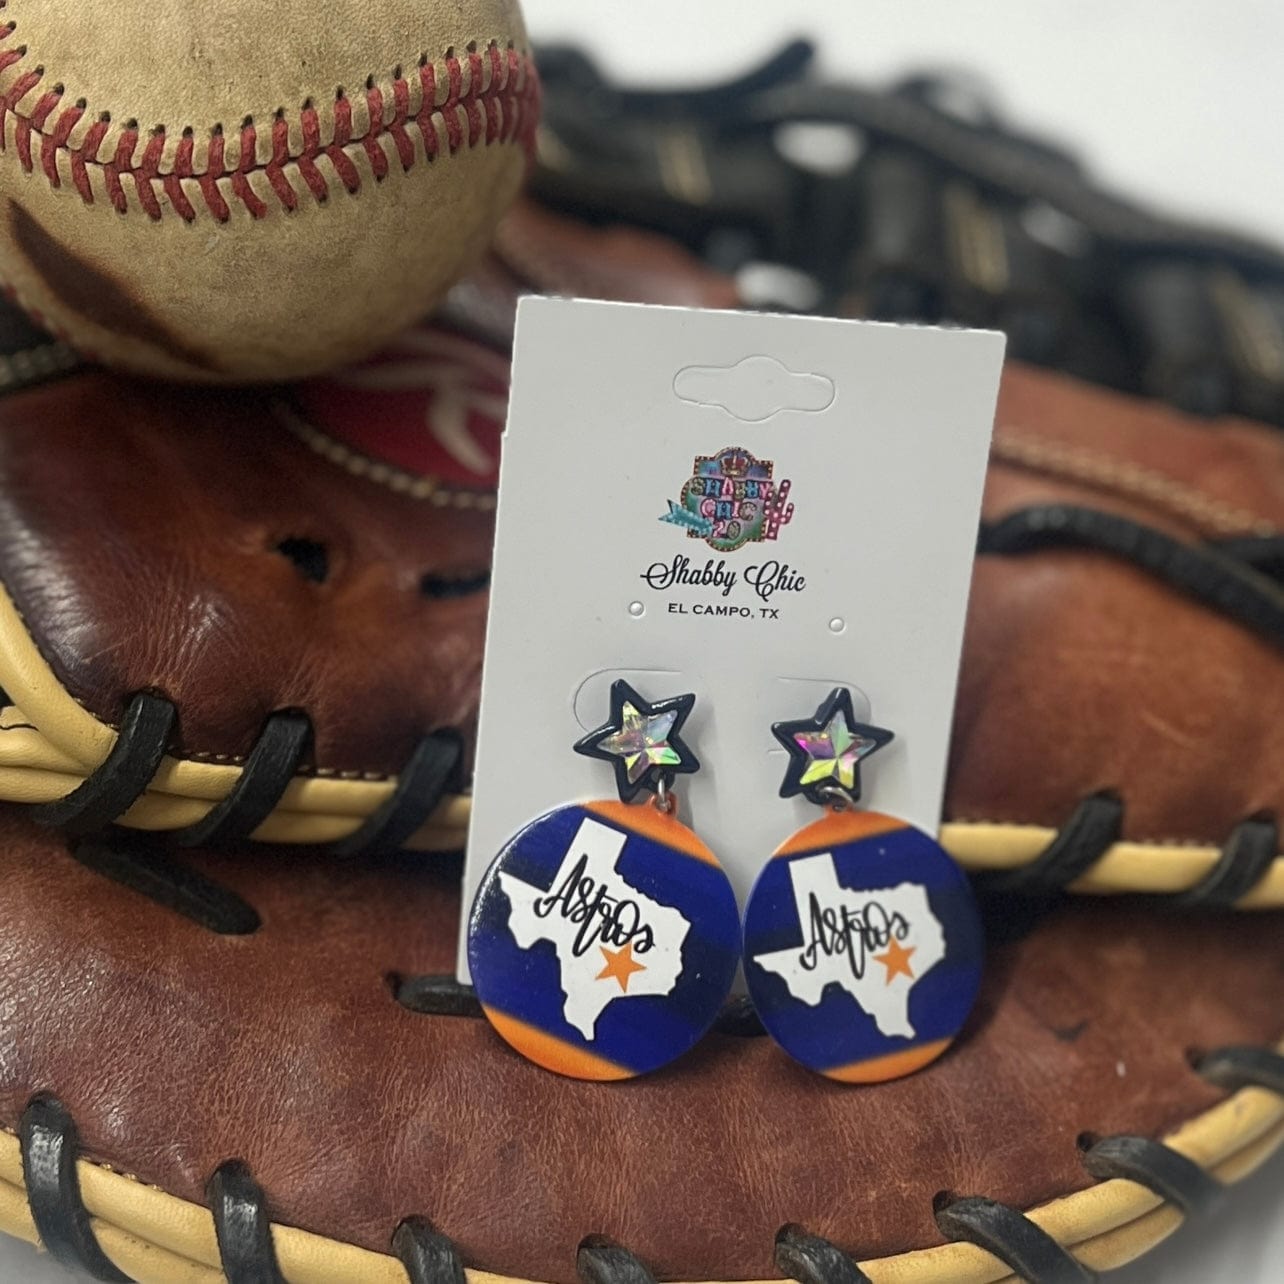 Baseball Team Earrings Shabby Chic Boutique and Tanning Salon Navy with Orange Dangle with Stars